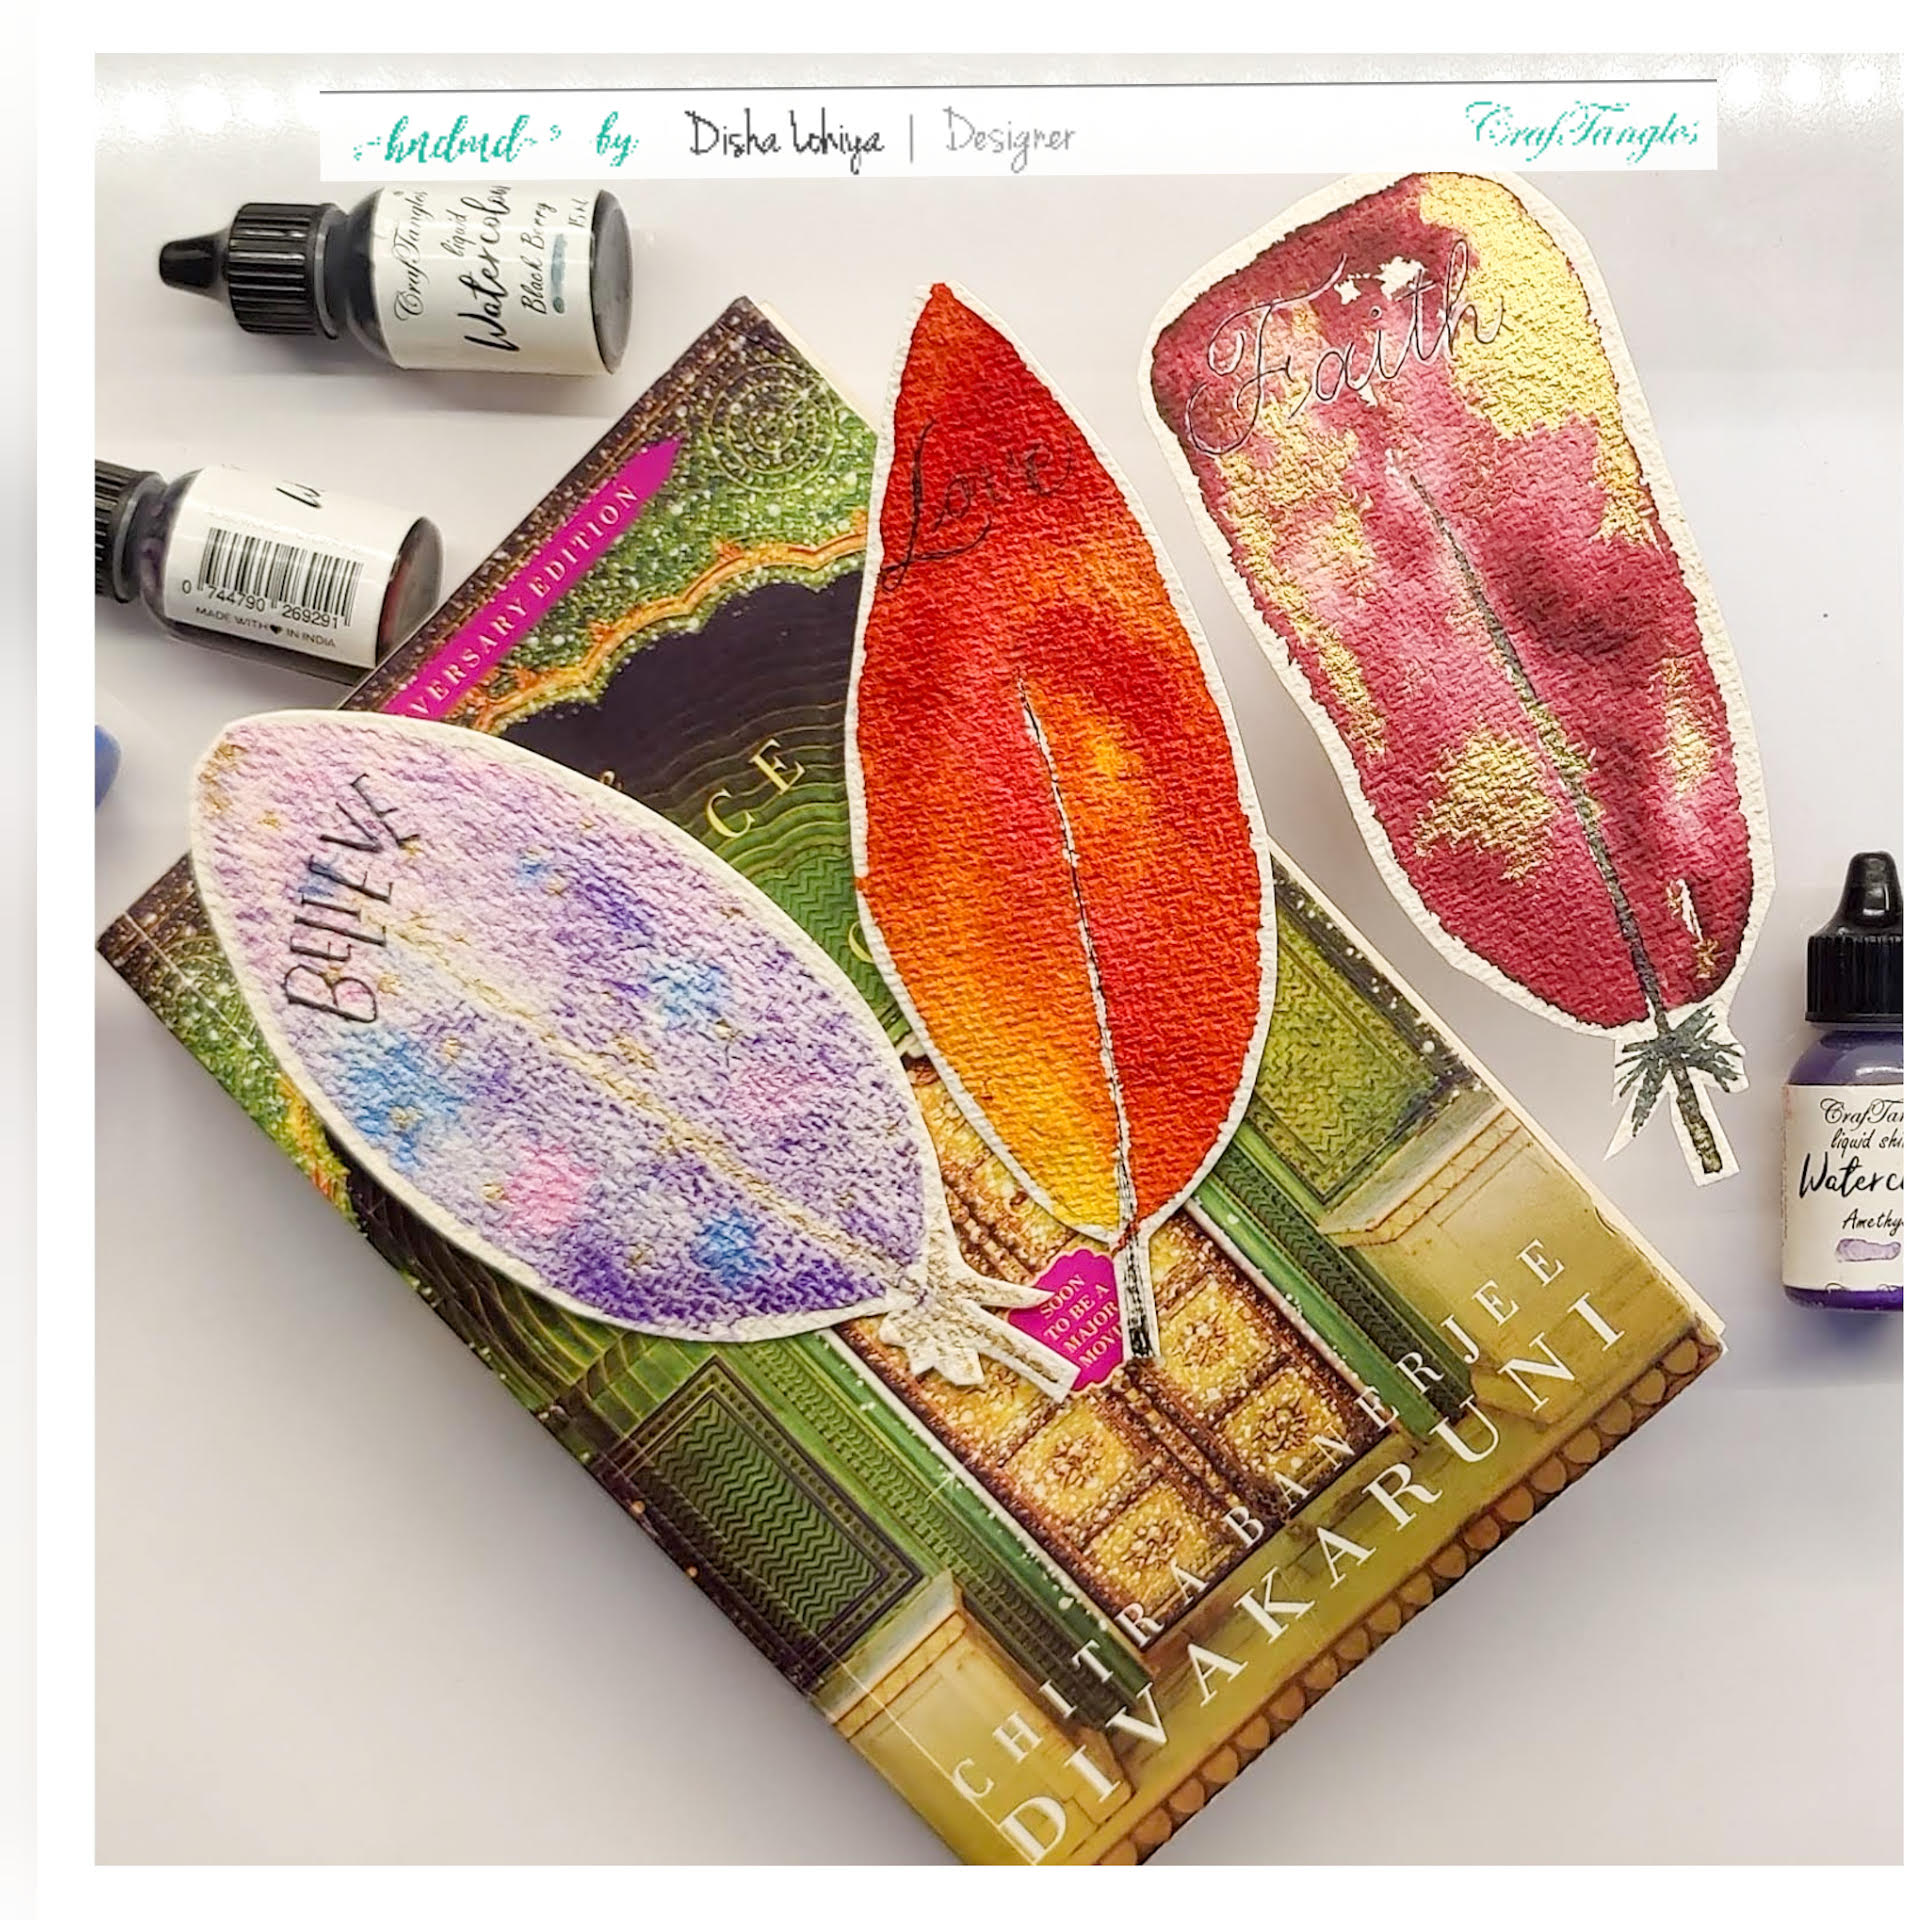 Learn to paint Loose Watercolor with concentrated Liquid Watercolors -  HNDMD Blog